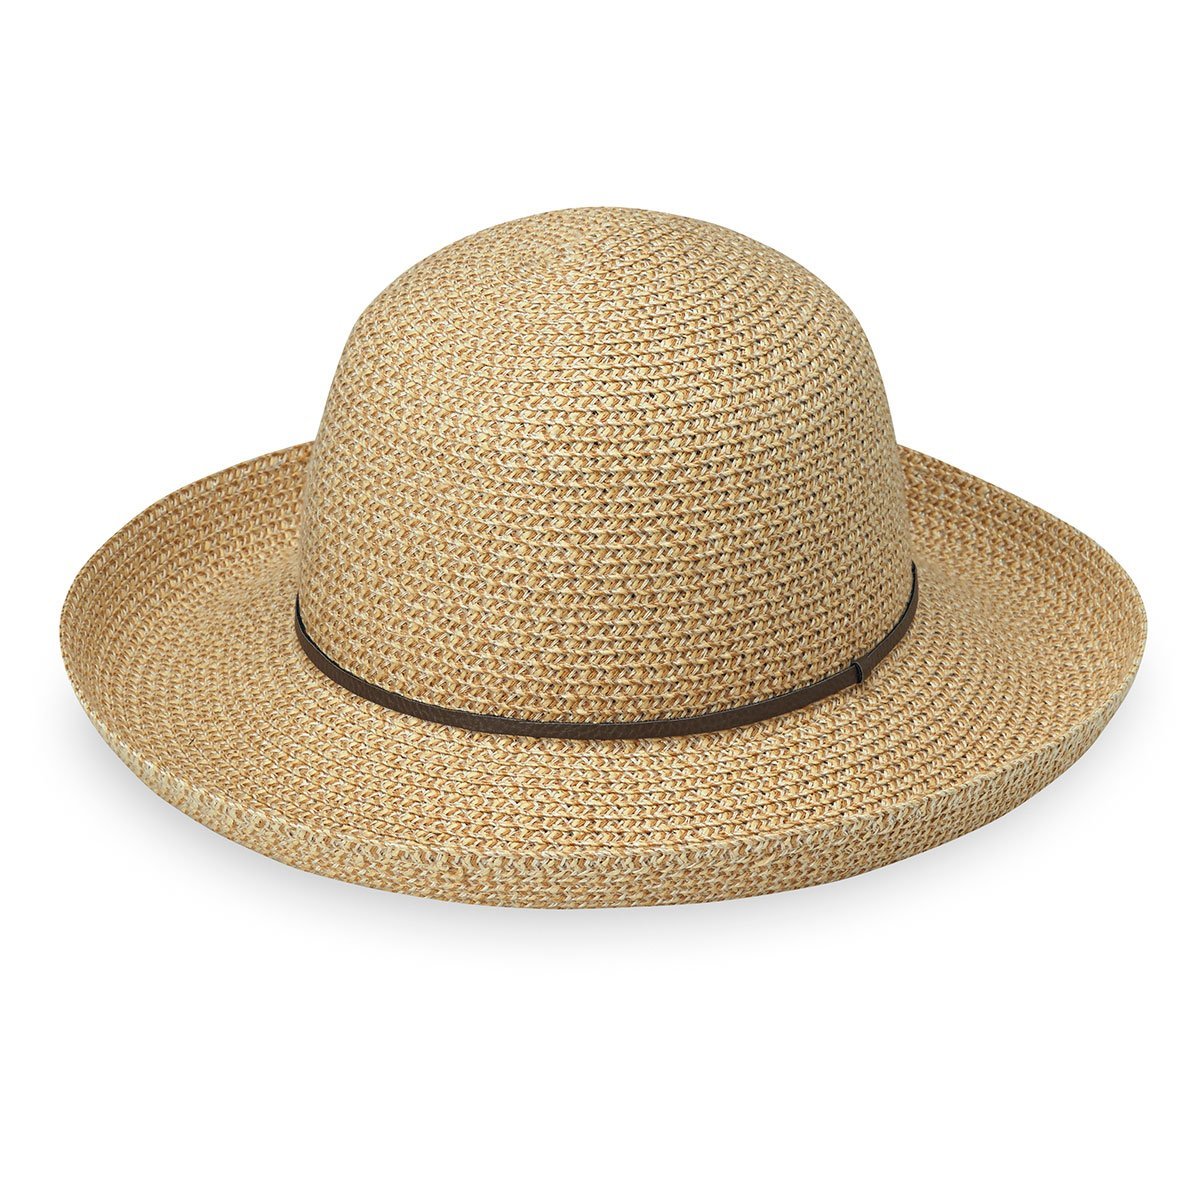 Featuring Amelia Wide Brim Packable UPF Sun Hat in Natural from Wallaroo